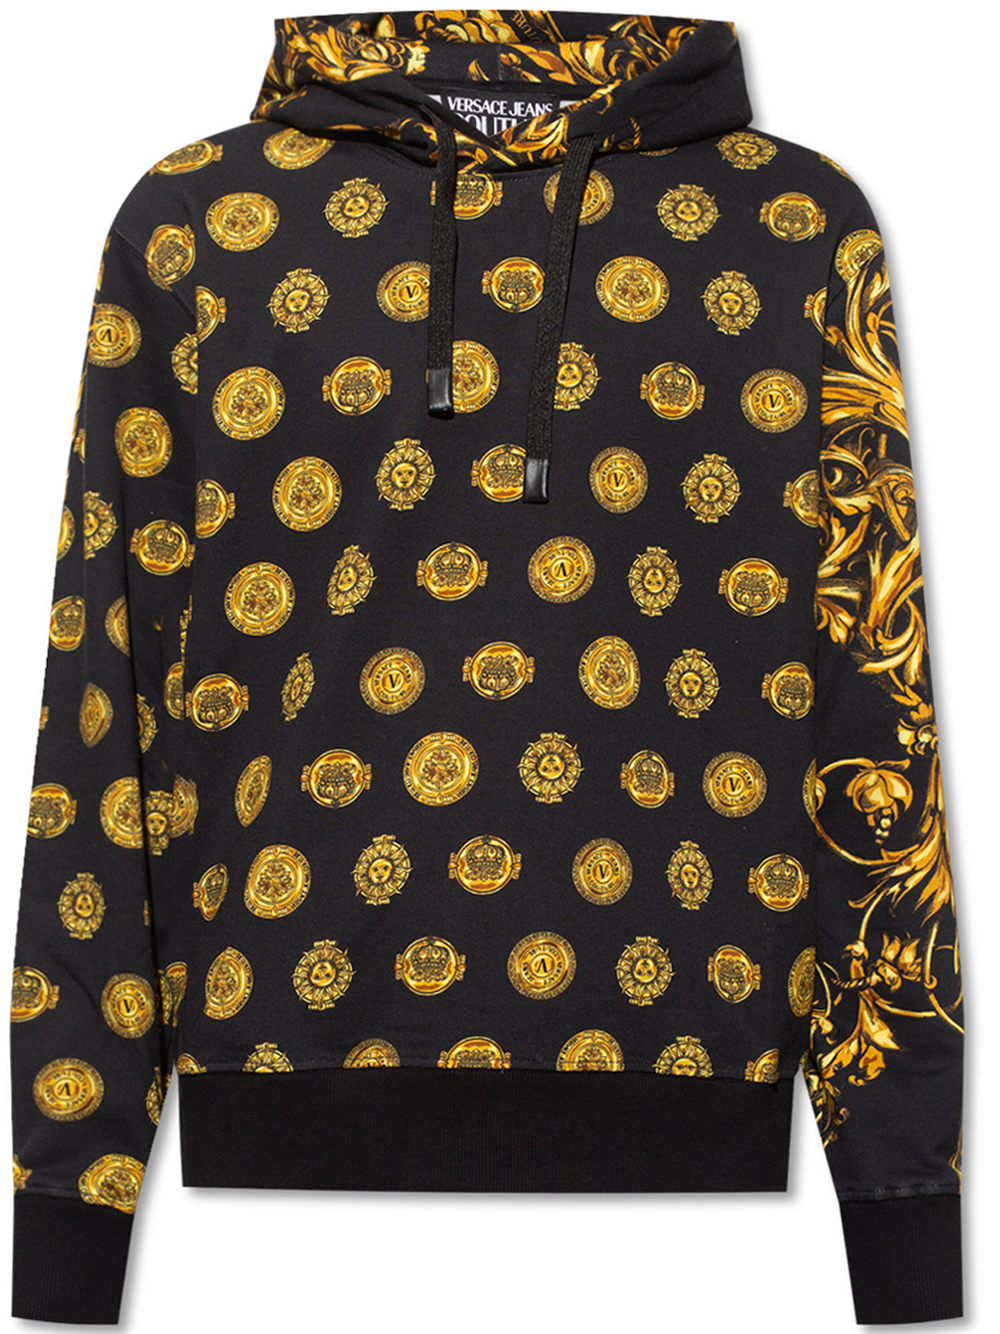 COUTURE BLACK PATTERNED HOODIE